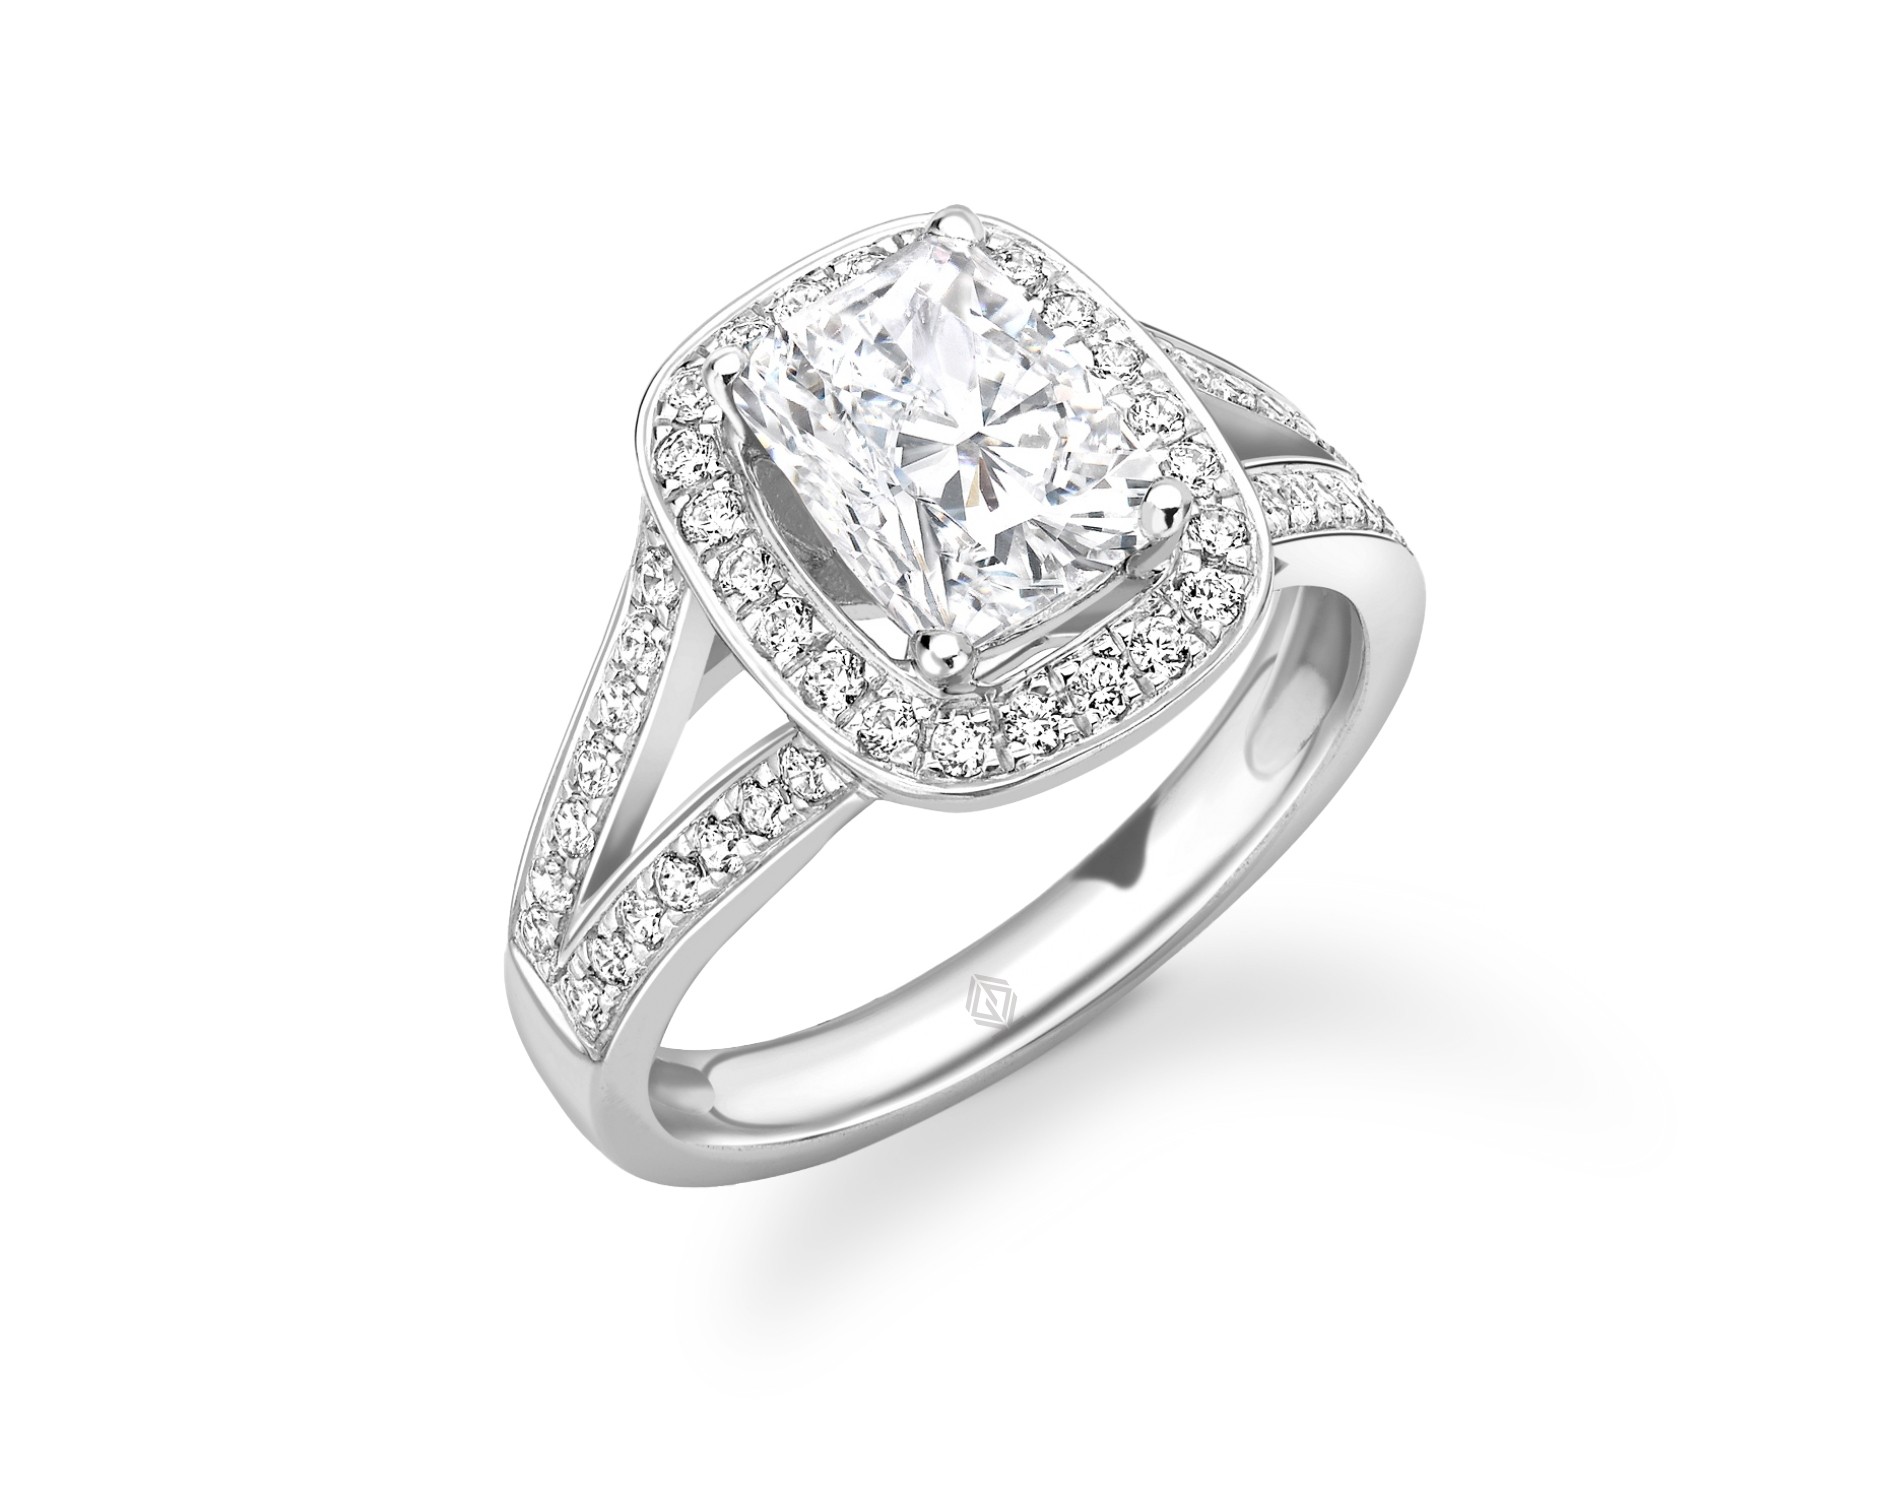 18K WHITE GOLD LONG CUSHION CUT HALO DIAMOND ENGAGEMENT RING WITH SIDE STONES IN SPLIT SHANK CHANNEL SET